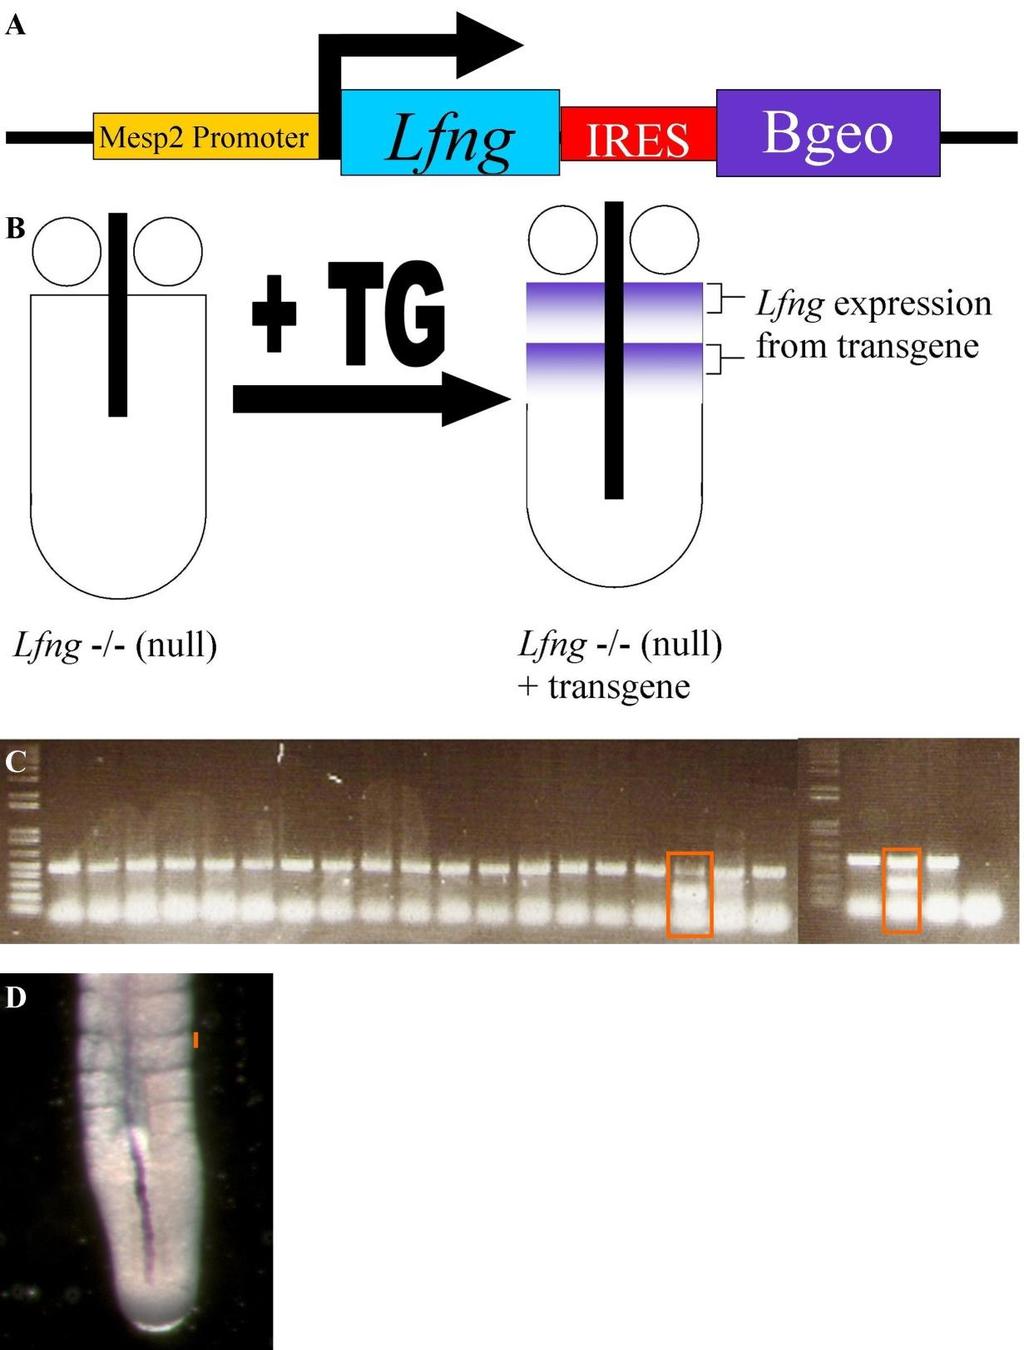 Figure 2.4 Anterior Specific transgene The structure of our transgene is shown in (a), with the Mesp2 promoter linked to the Lfng gene.